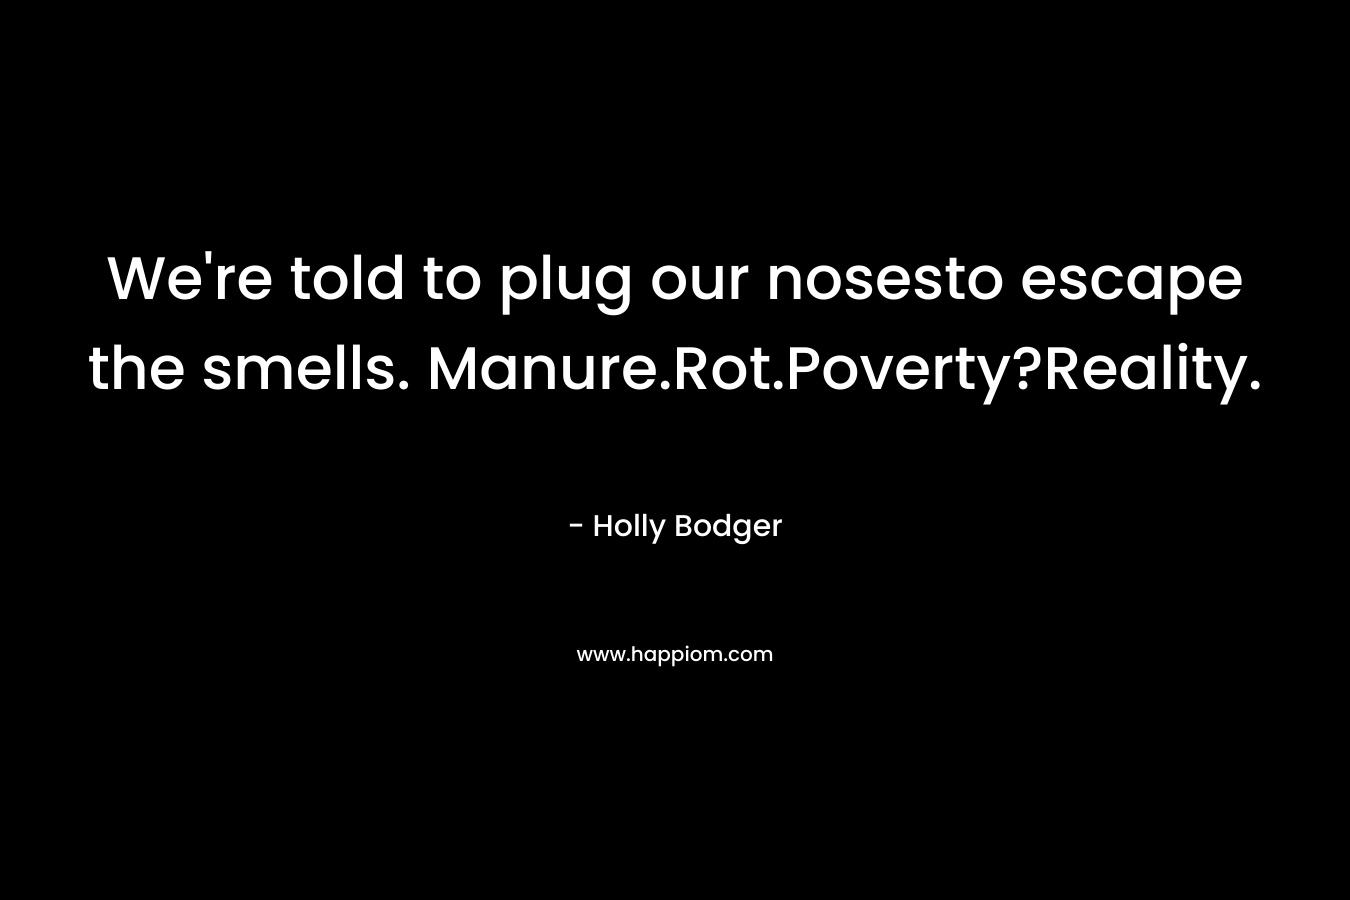 We’re told to plug our nosesto escape the smells. Manure.Rot.Poverty?Reality. – Holly Bodger